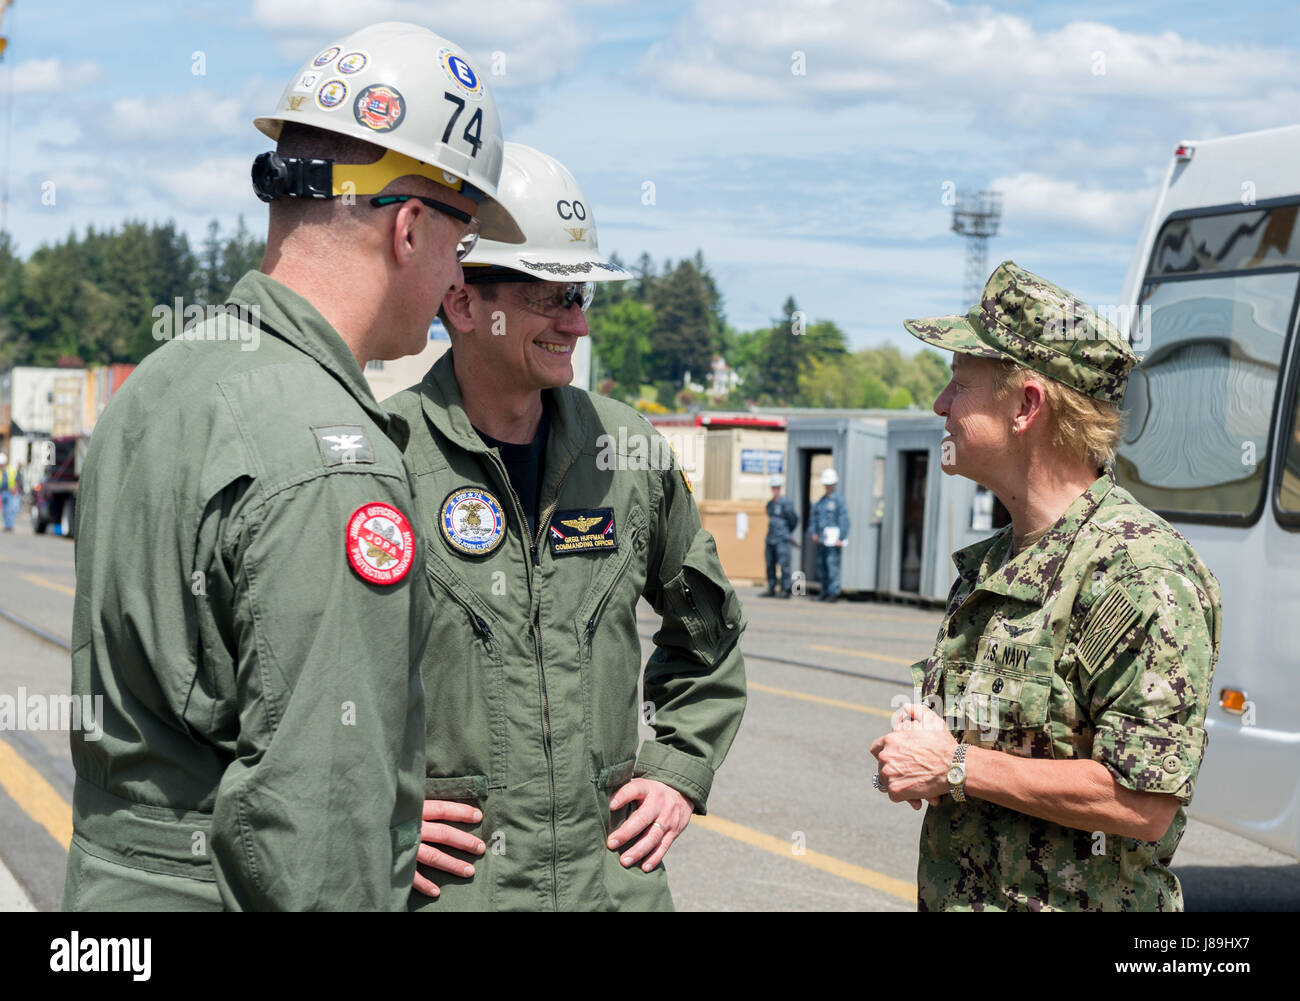 170519-N-BR087-106 BREMERTON, Washington (May 19, 2017) Vice Adm. Nora Tyson, commander, U.S. 3rd Fleet, greets Capt. Gregory Huffman, commanding officer of USS John C. Stennis (CVN 74), and Capt. Scott Miller, executive officer, during a visit to speak with Sailors. Tyson is visiting the Pacific Northwest to speak with Sailors during various all hands calls around Naval Base Kitsap and to serve as grand marshal of the 69th annual Bremerton Armed Forces Day Parade. John C. Stennis is conducting a planned incremental availability (PIA) at Puget Sound Naval Shipyard and Intermediate Maintenance  Stock Photo